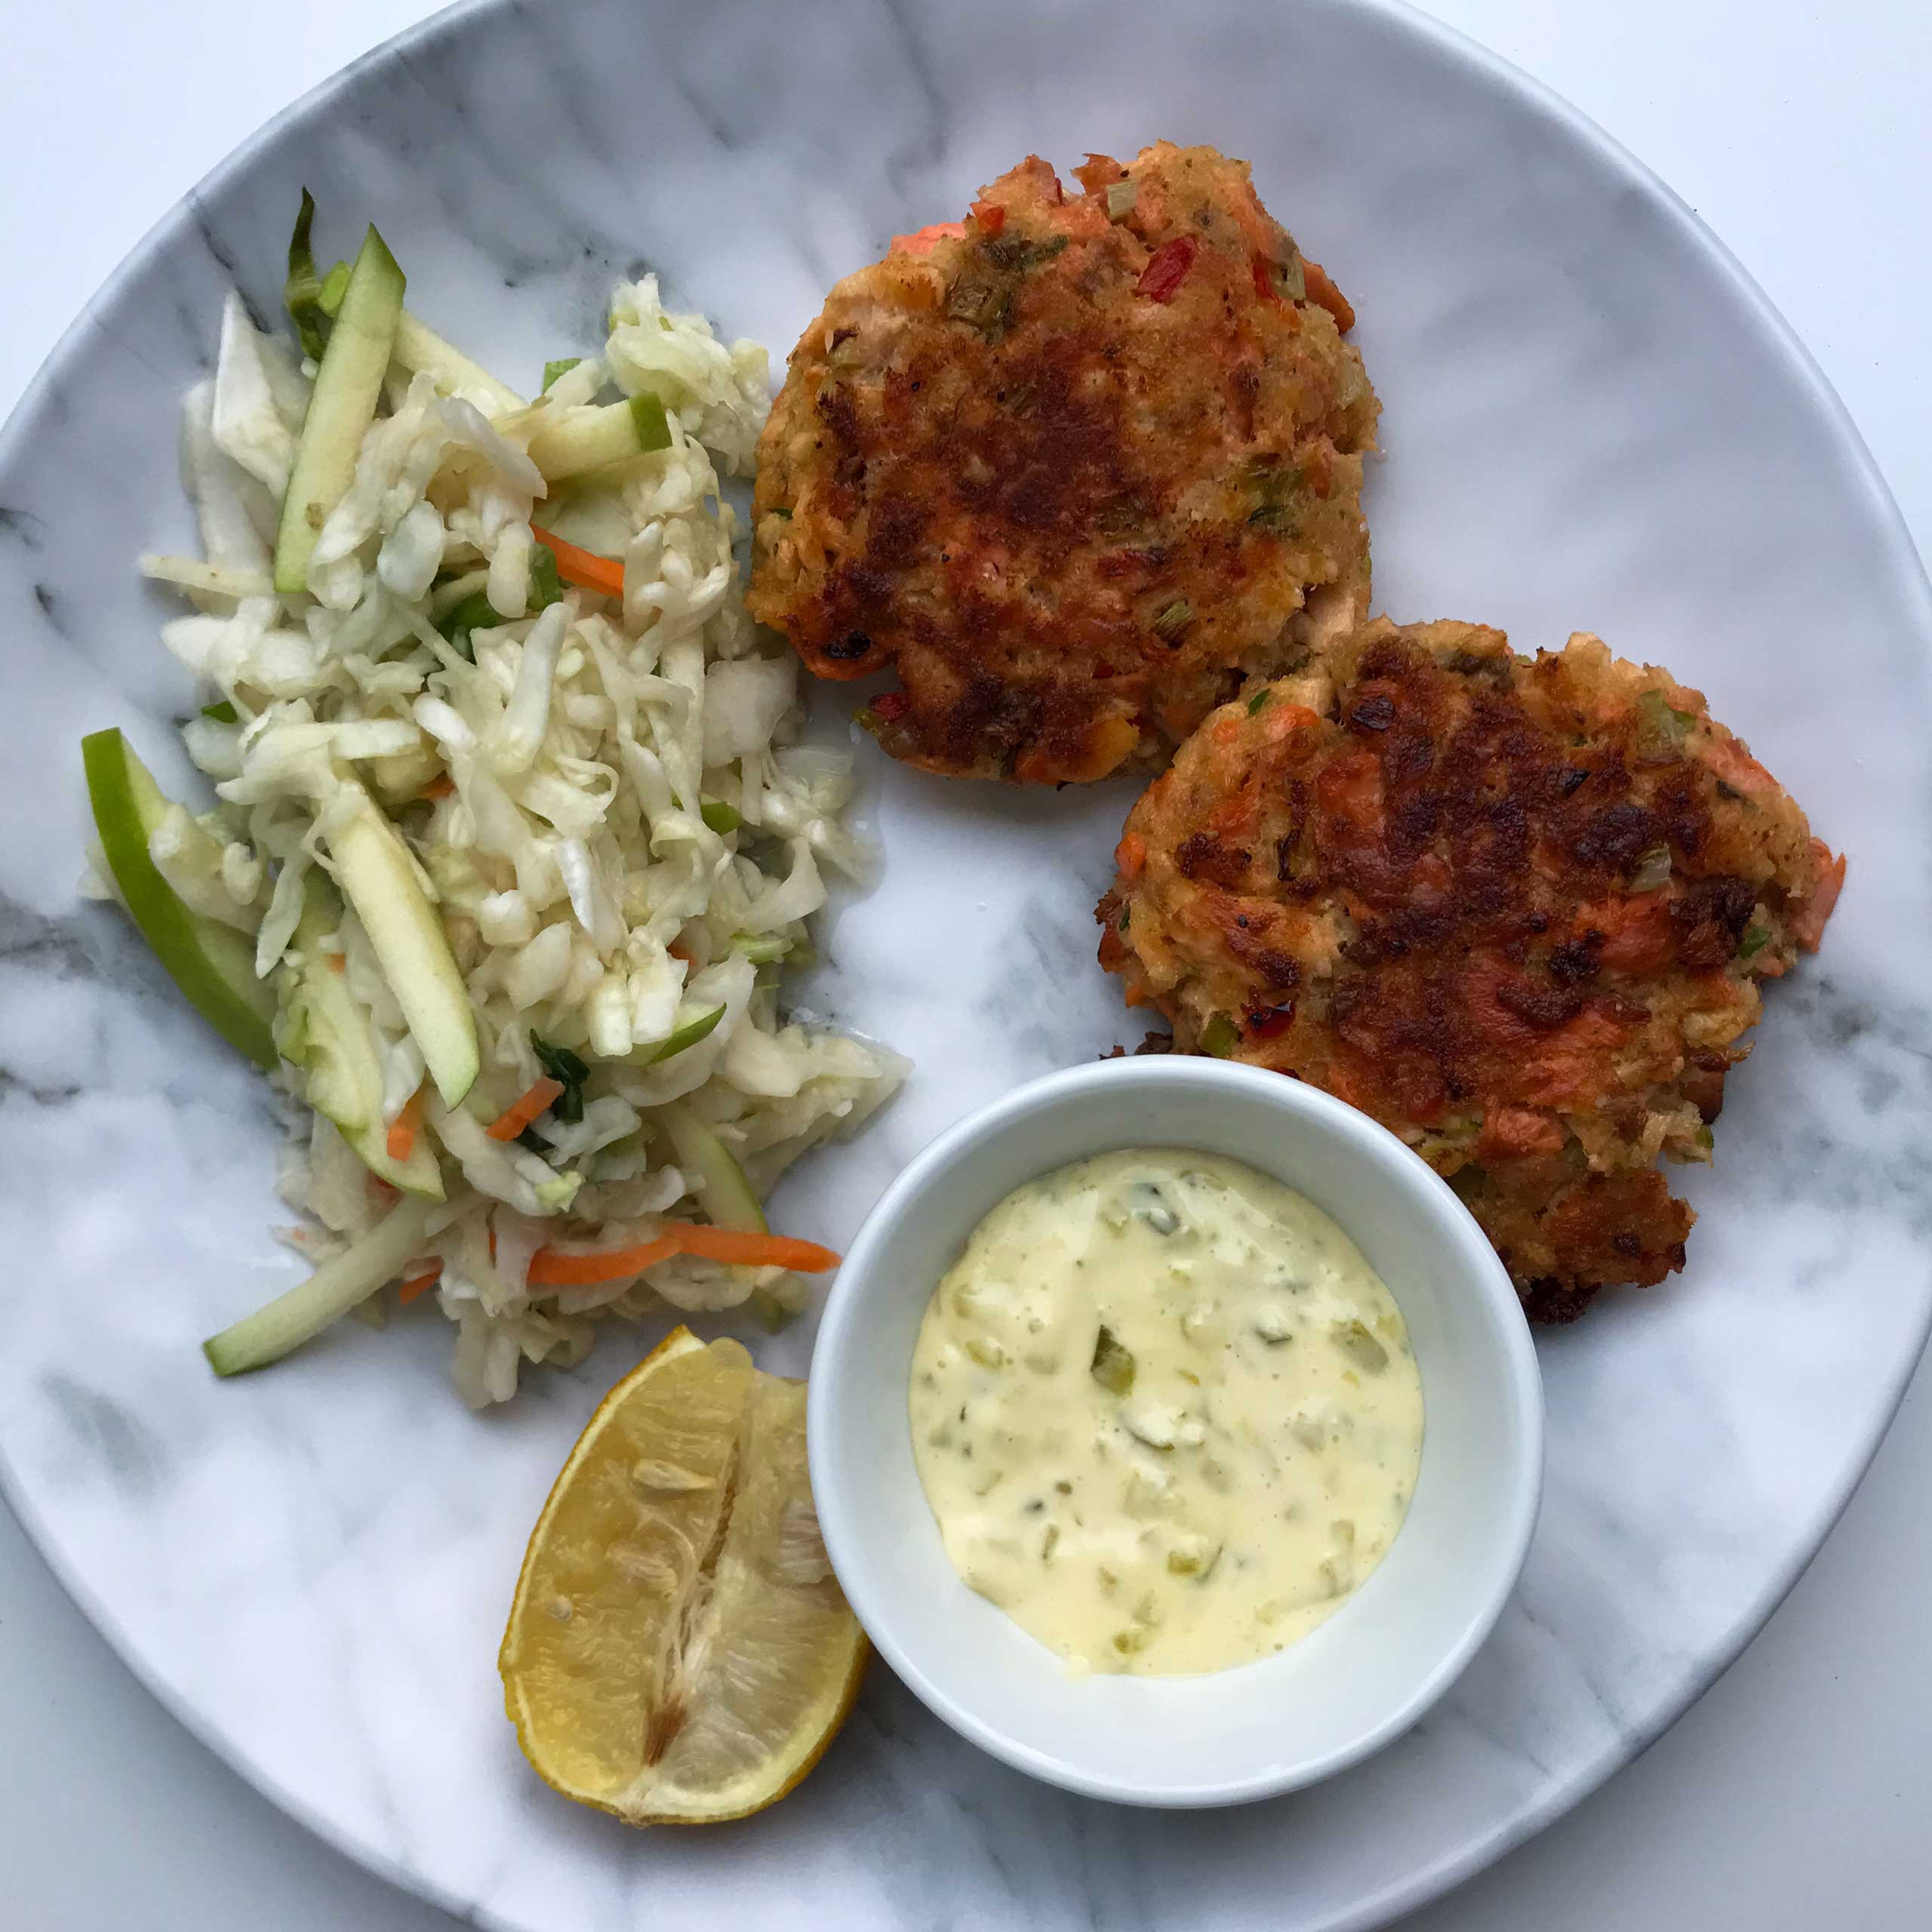 salmon patties and coleslaw on a plate.